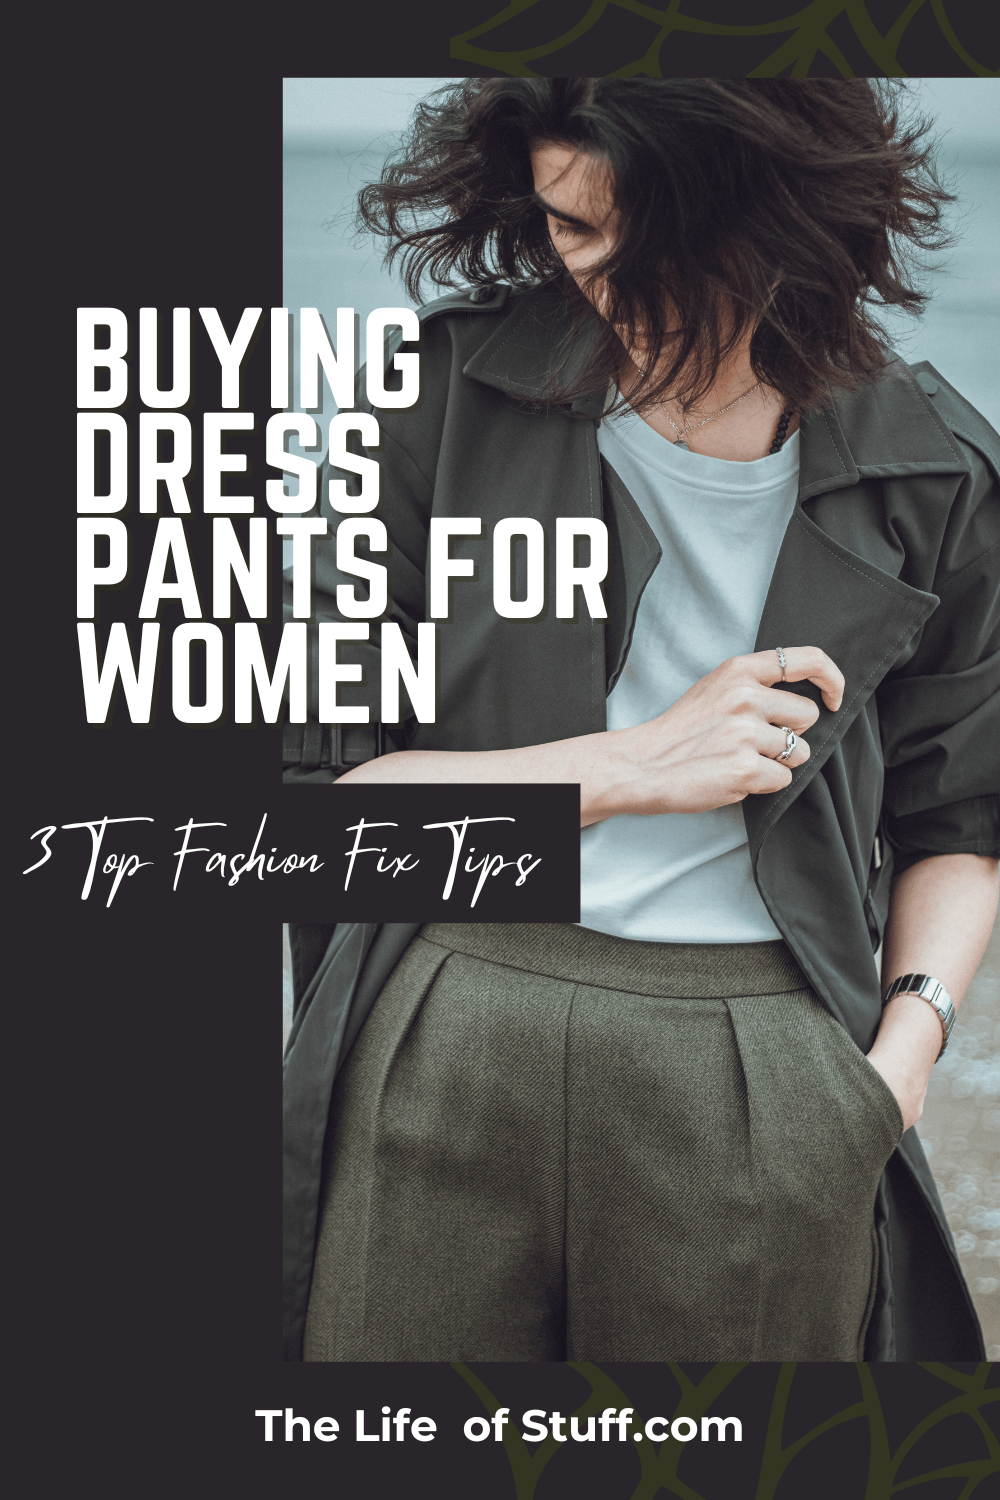 Buying Dress Pants for Women - The Life of Stuff